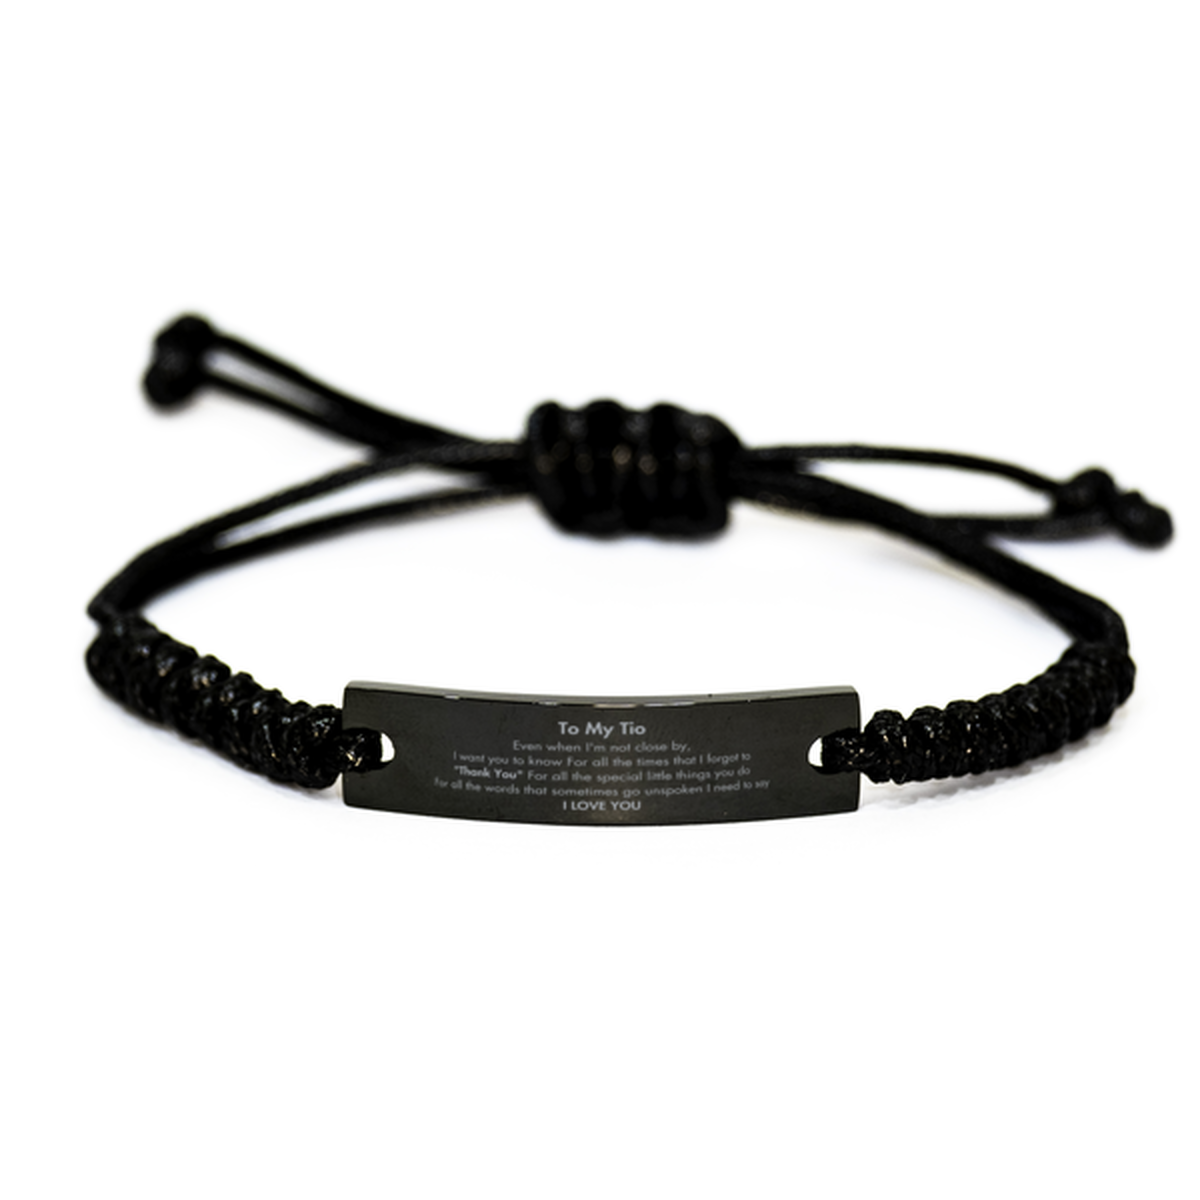 Thank You Gifts for Tio, Keepsake Black Rope Bracelet Gifts for Tio Birthday Mother's day Father's Day Tio For all the words That sometimes go unspoken I need to say I LOVE YOU